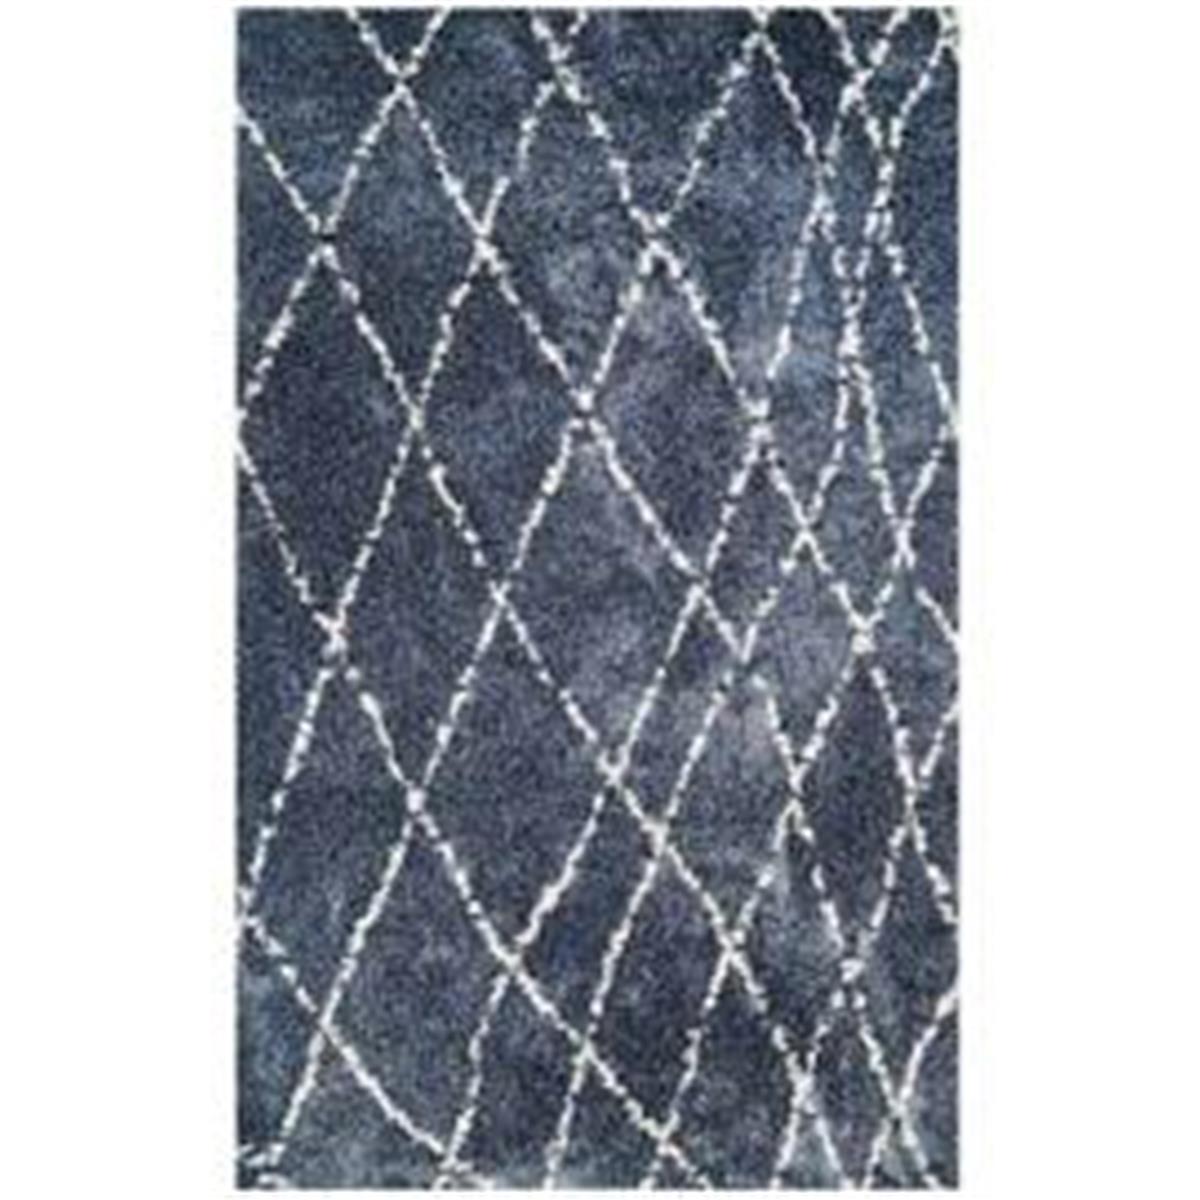 43170106020311t 2 Ft. X 3 Ft. 11 In. Bromley Whistler Rug, Blue & Snow